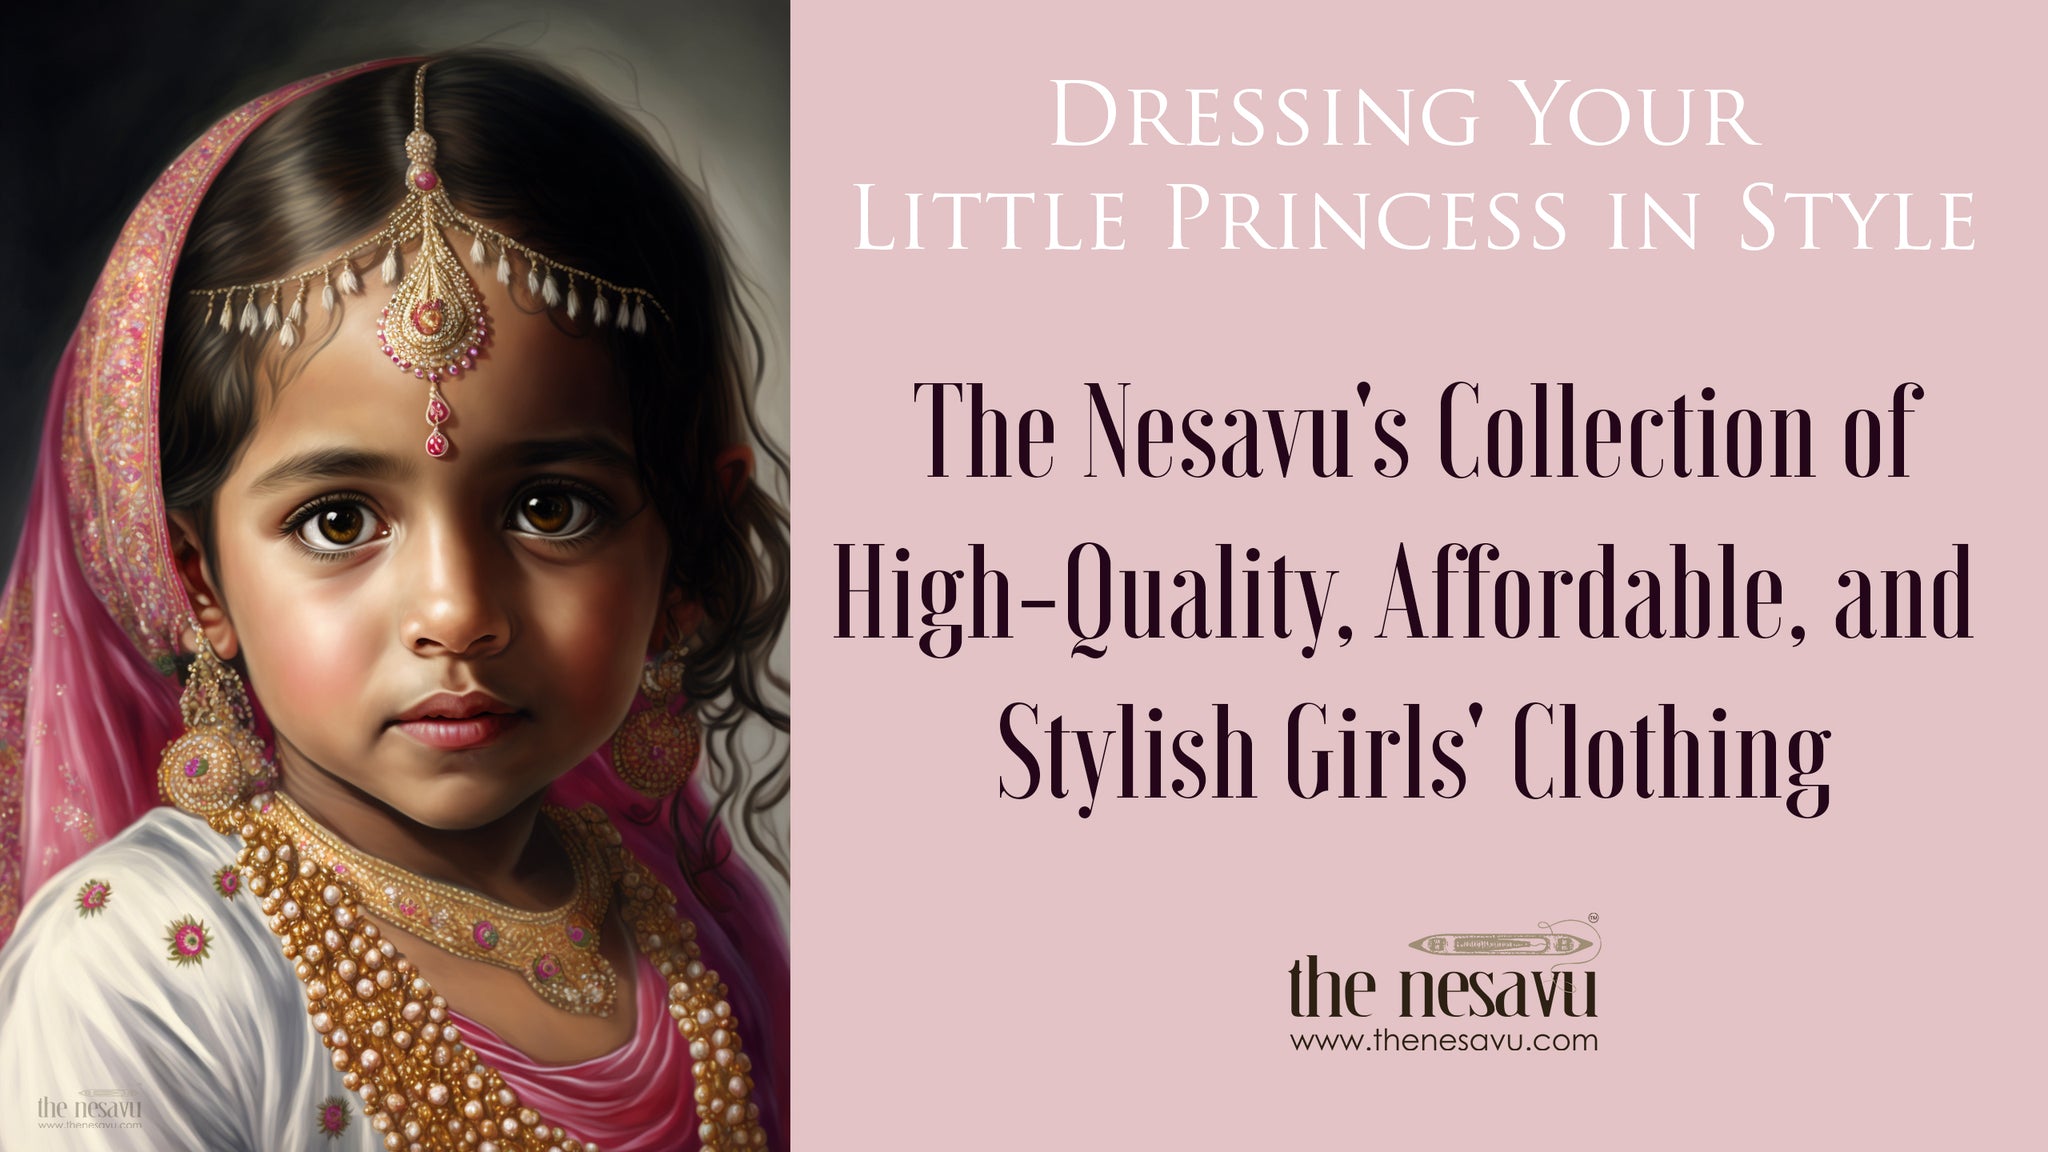 The Nesavu's Collection of High-Quality, Affordable, and Stylish Girls' Clothing